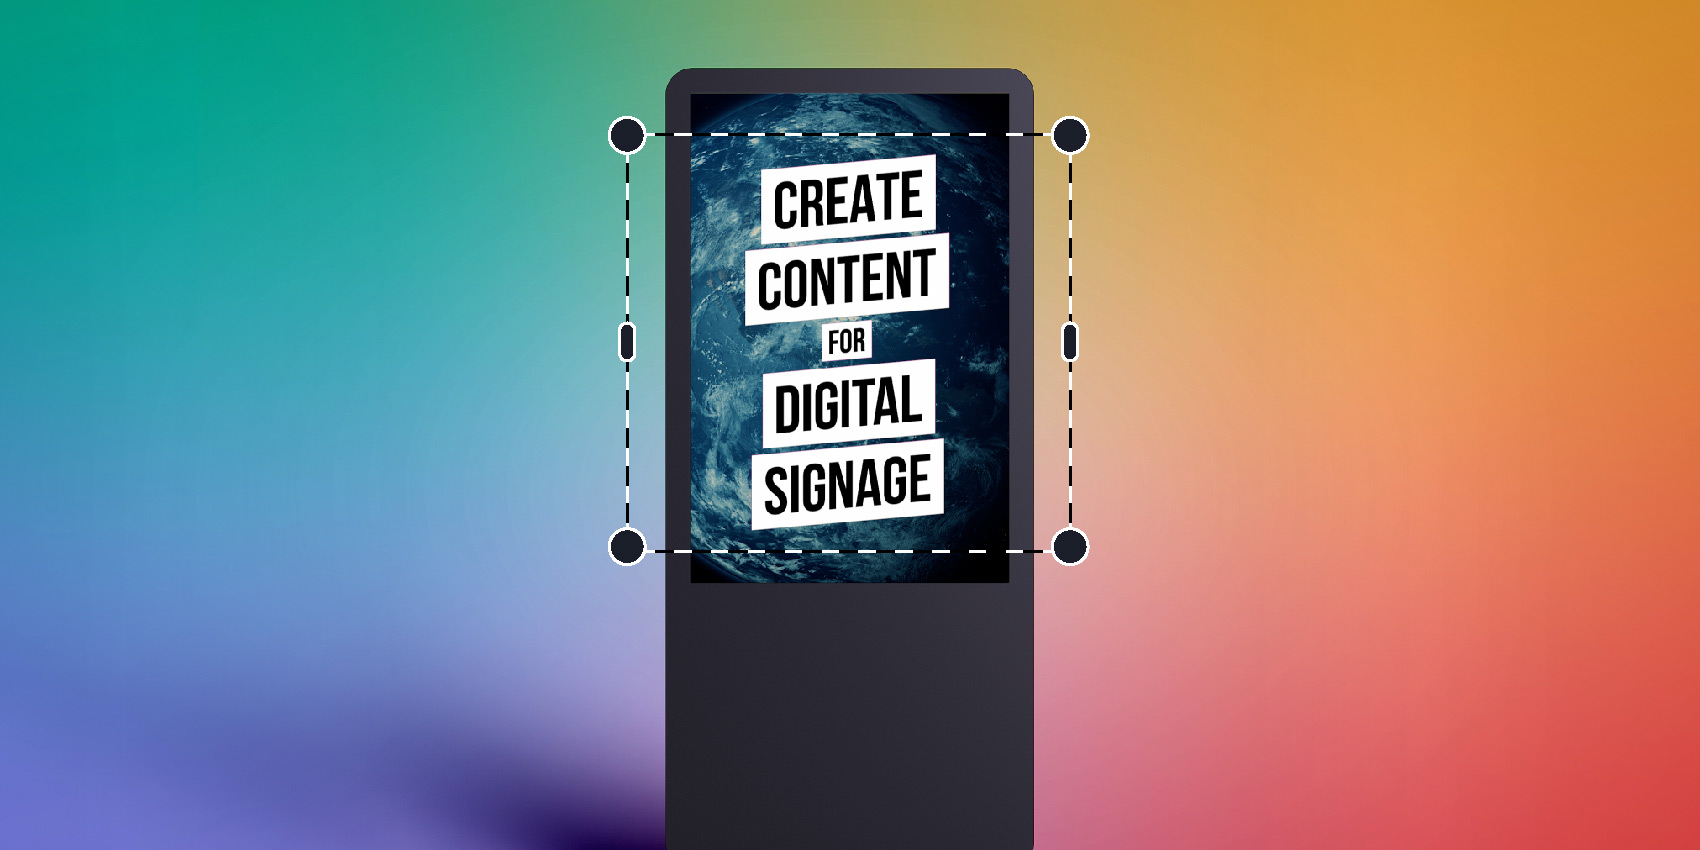 Create content for digital signage